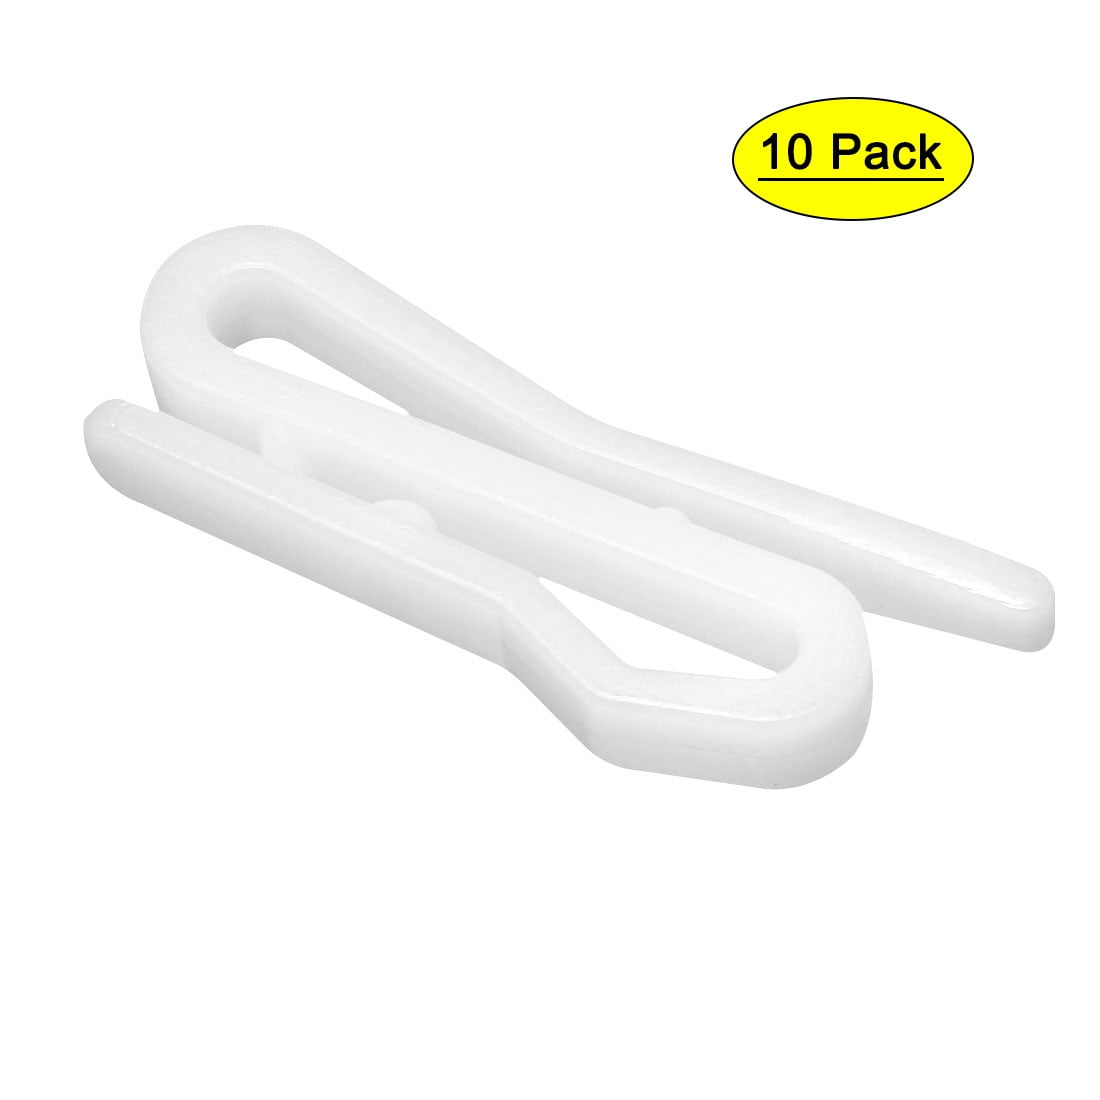 CH1 WHITE PLASTIC CURTAIN HOOKS FOR CURTAINS WITH CURTAIN RINGS & HEADER TAPE 